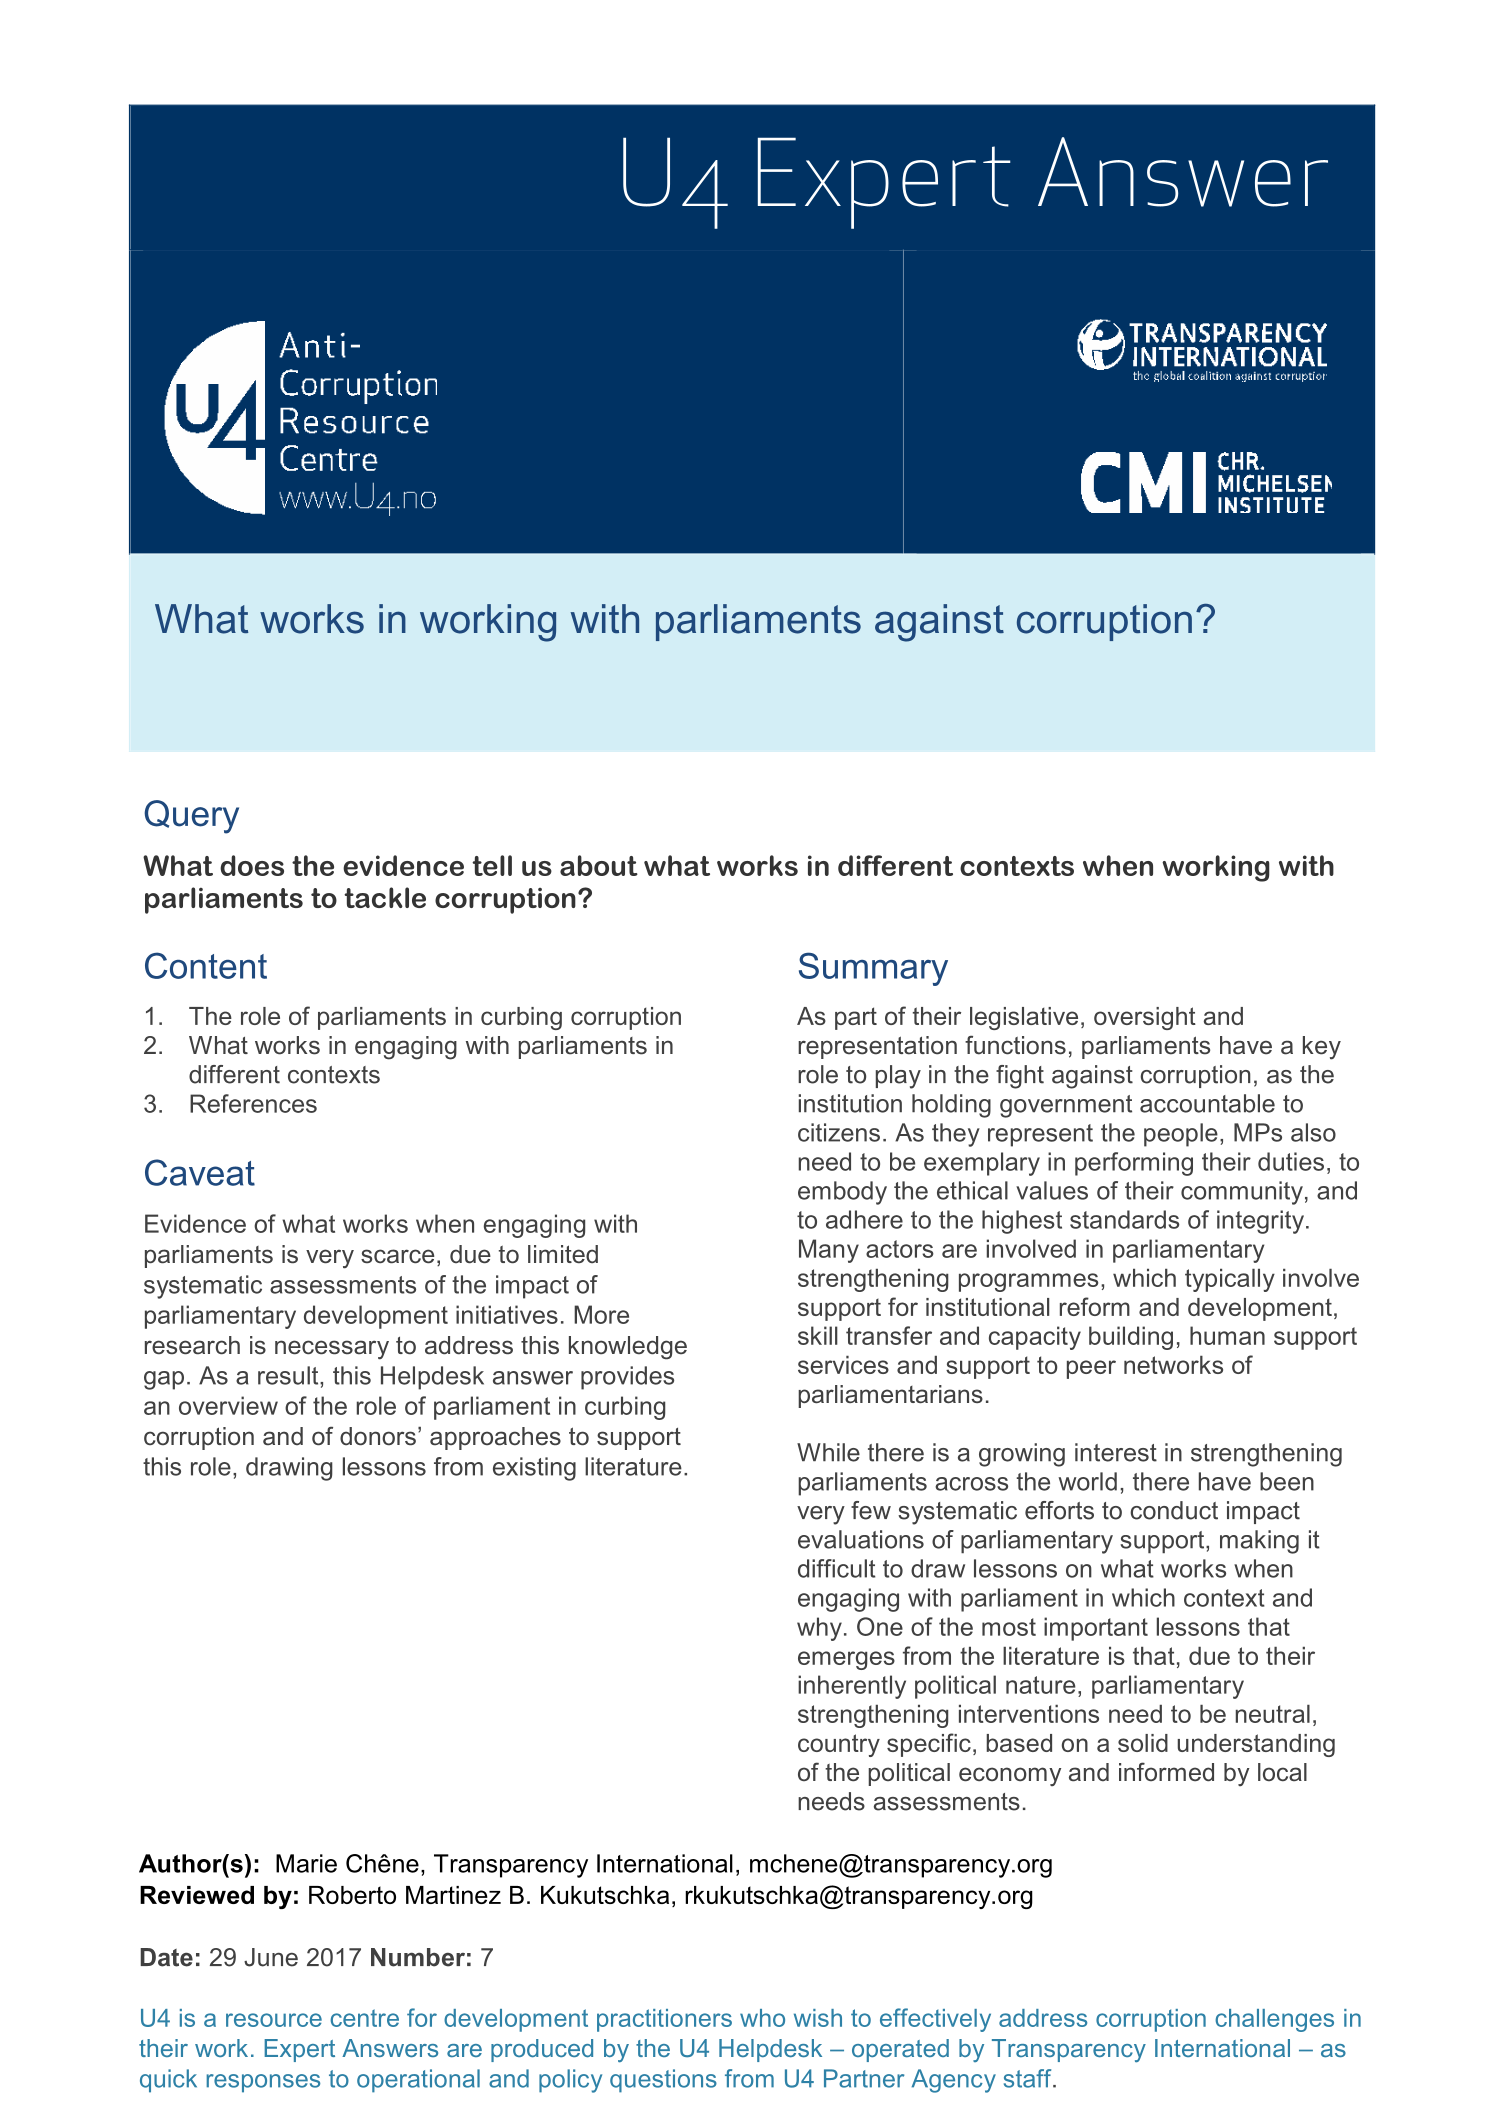 What works in working with parliaments against corruption?